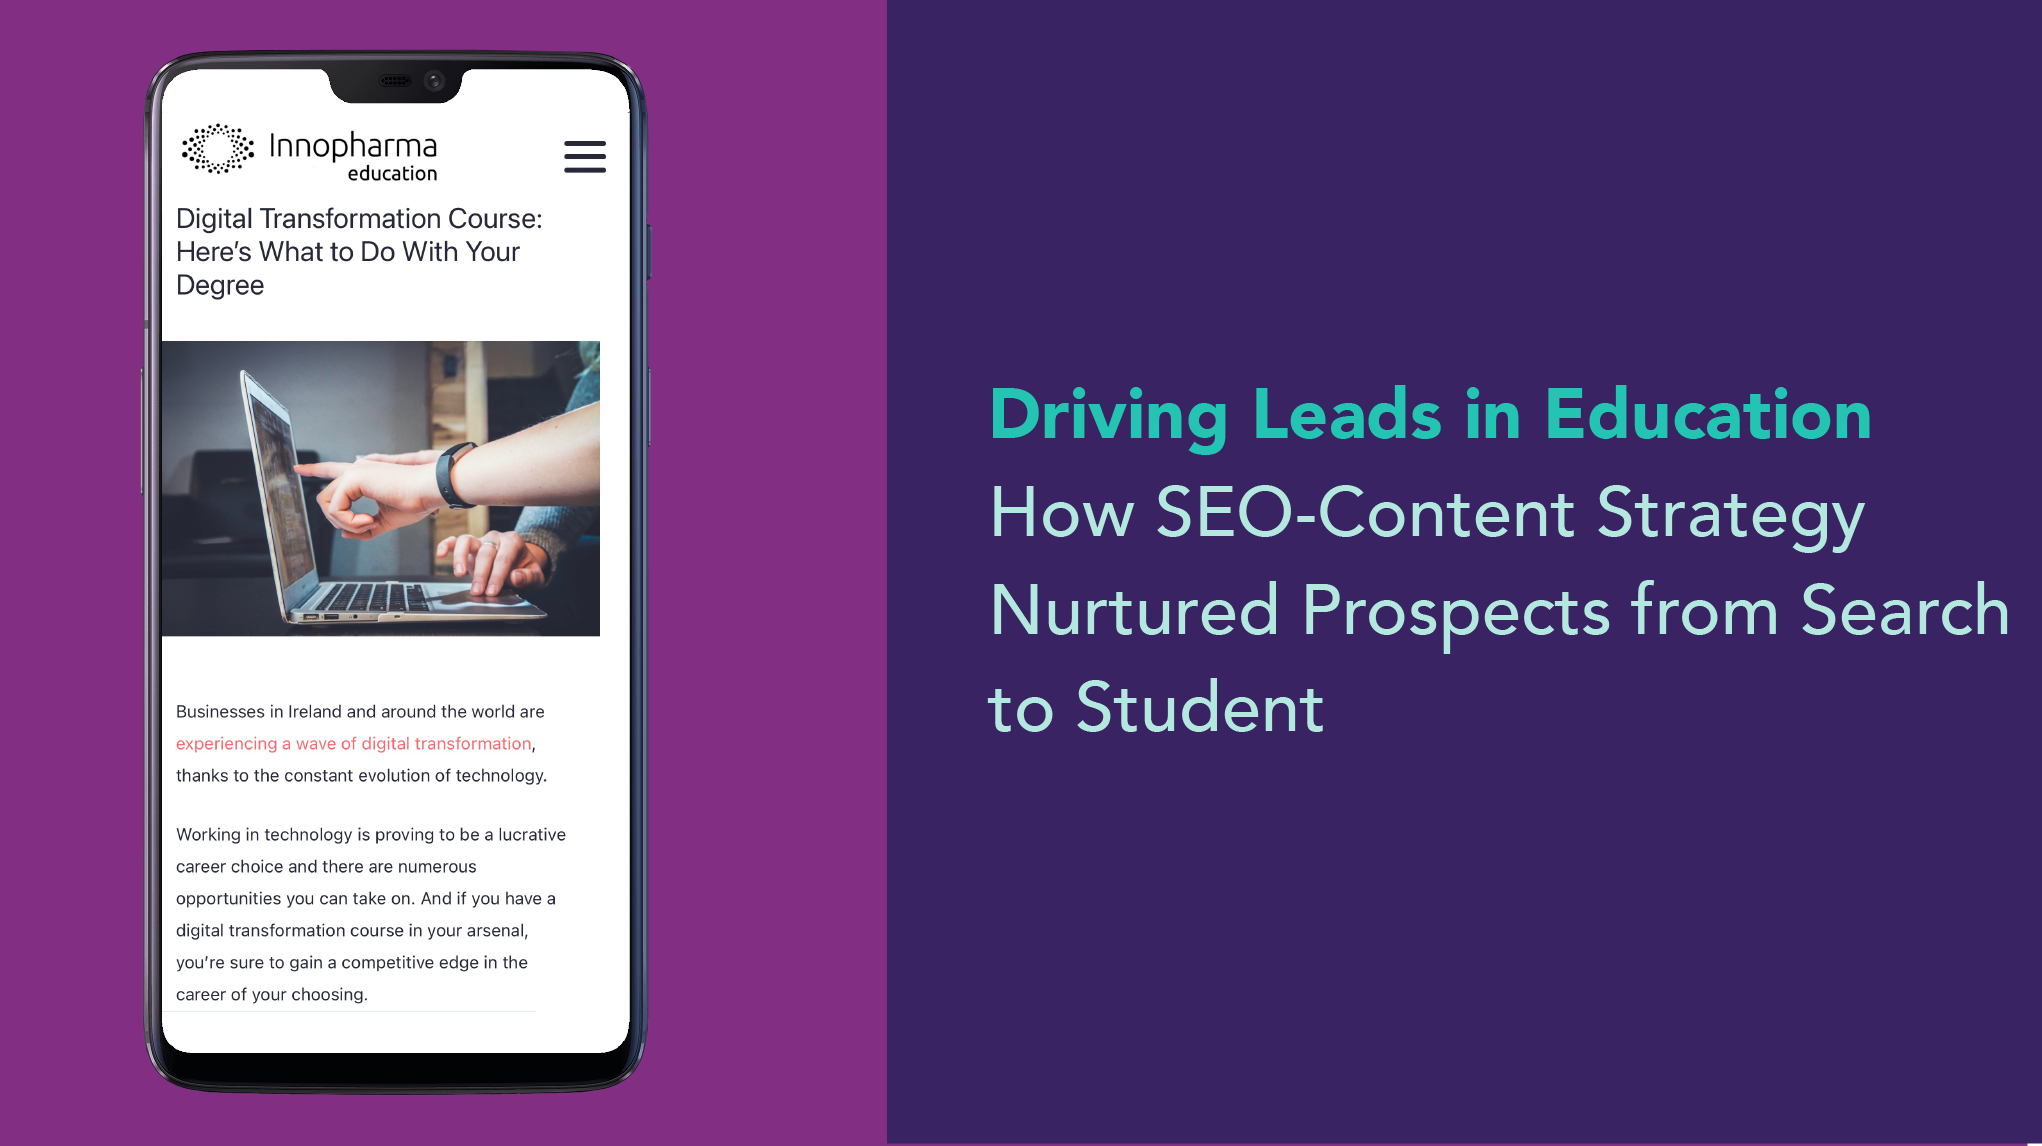 The SEO-Content Strategy That Smashed Student Enrolment Target by +40%